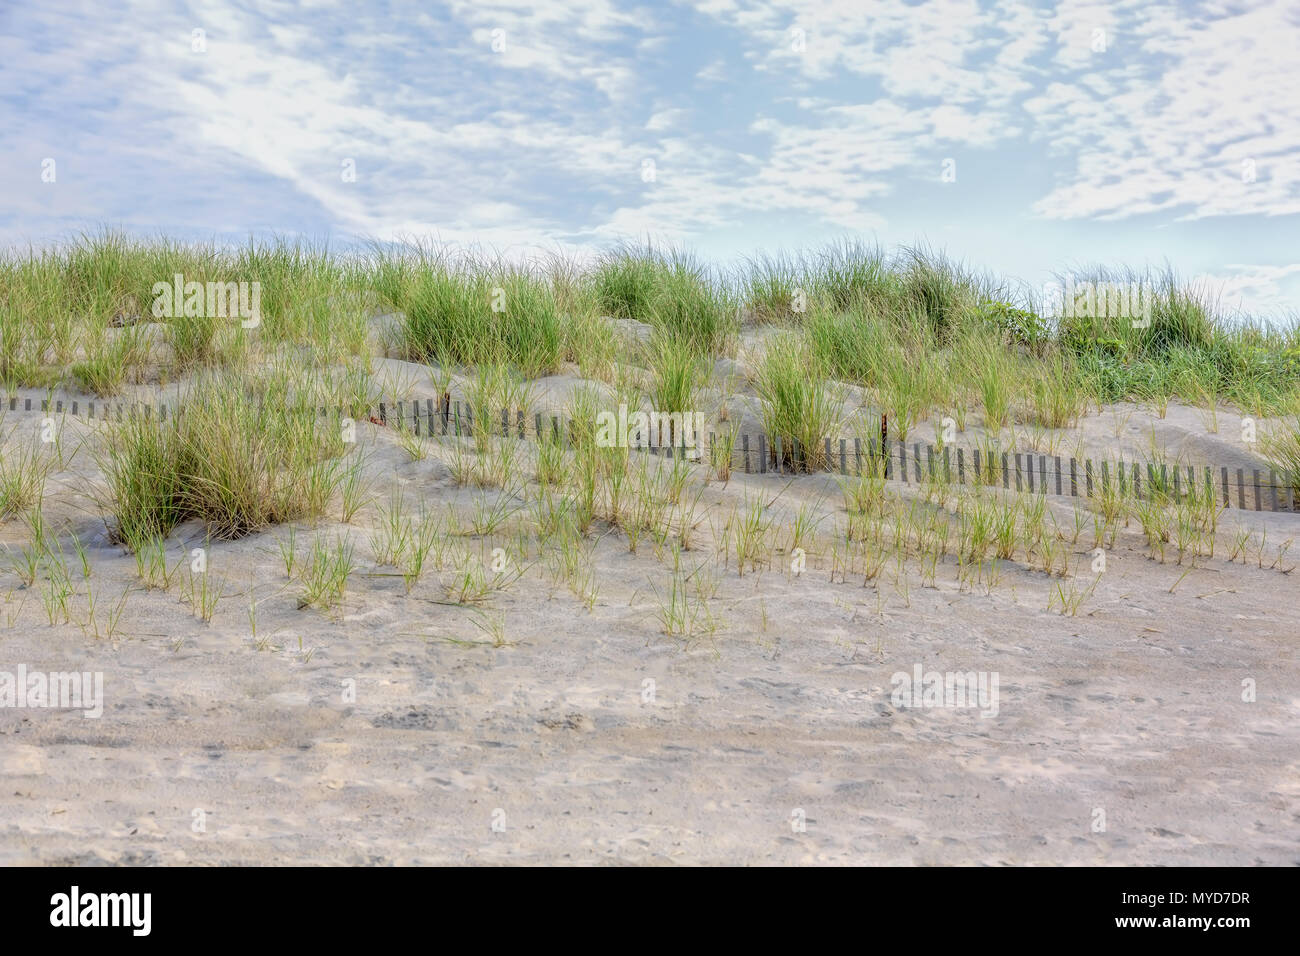 Beach with sand dunes Scene on a sunny day with blue skiy. Stock Photo